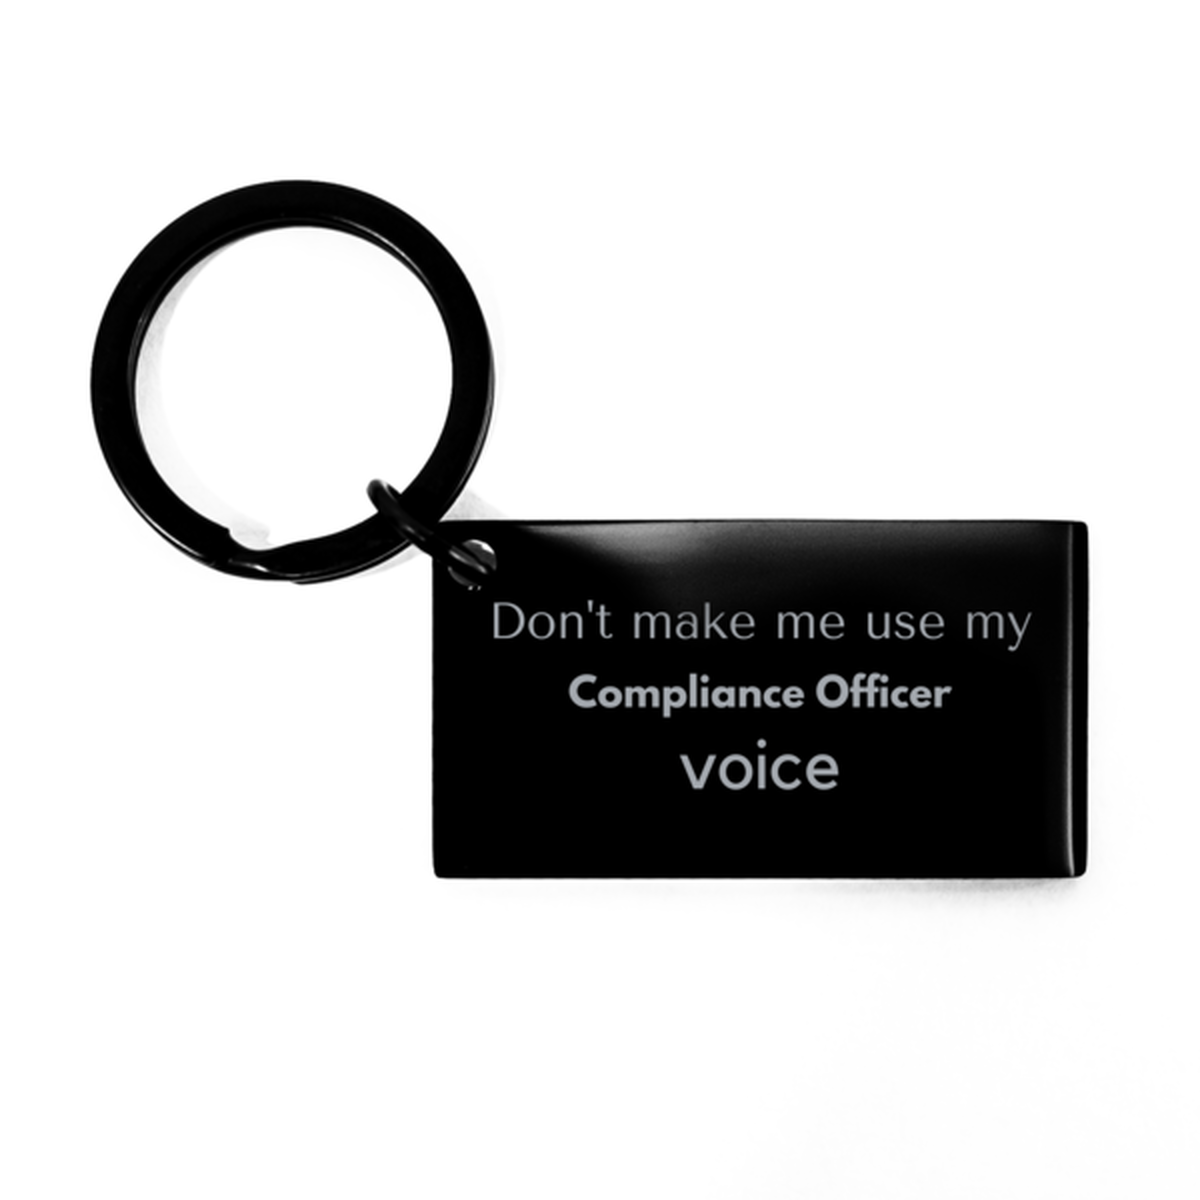 Don't make me use my Compliance Officer voice, Sarcasm Compliance Officer Gifts, Christmas Compliance Officer Keychain Birthday Unique Gifts For Compliance Officer Coworkers, Men, Women, Colleague, Friends